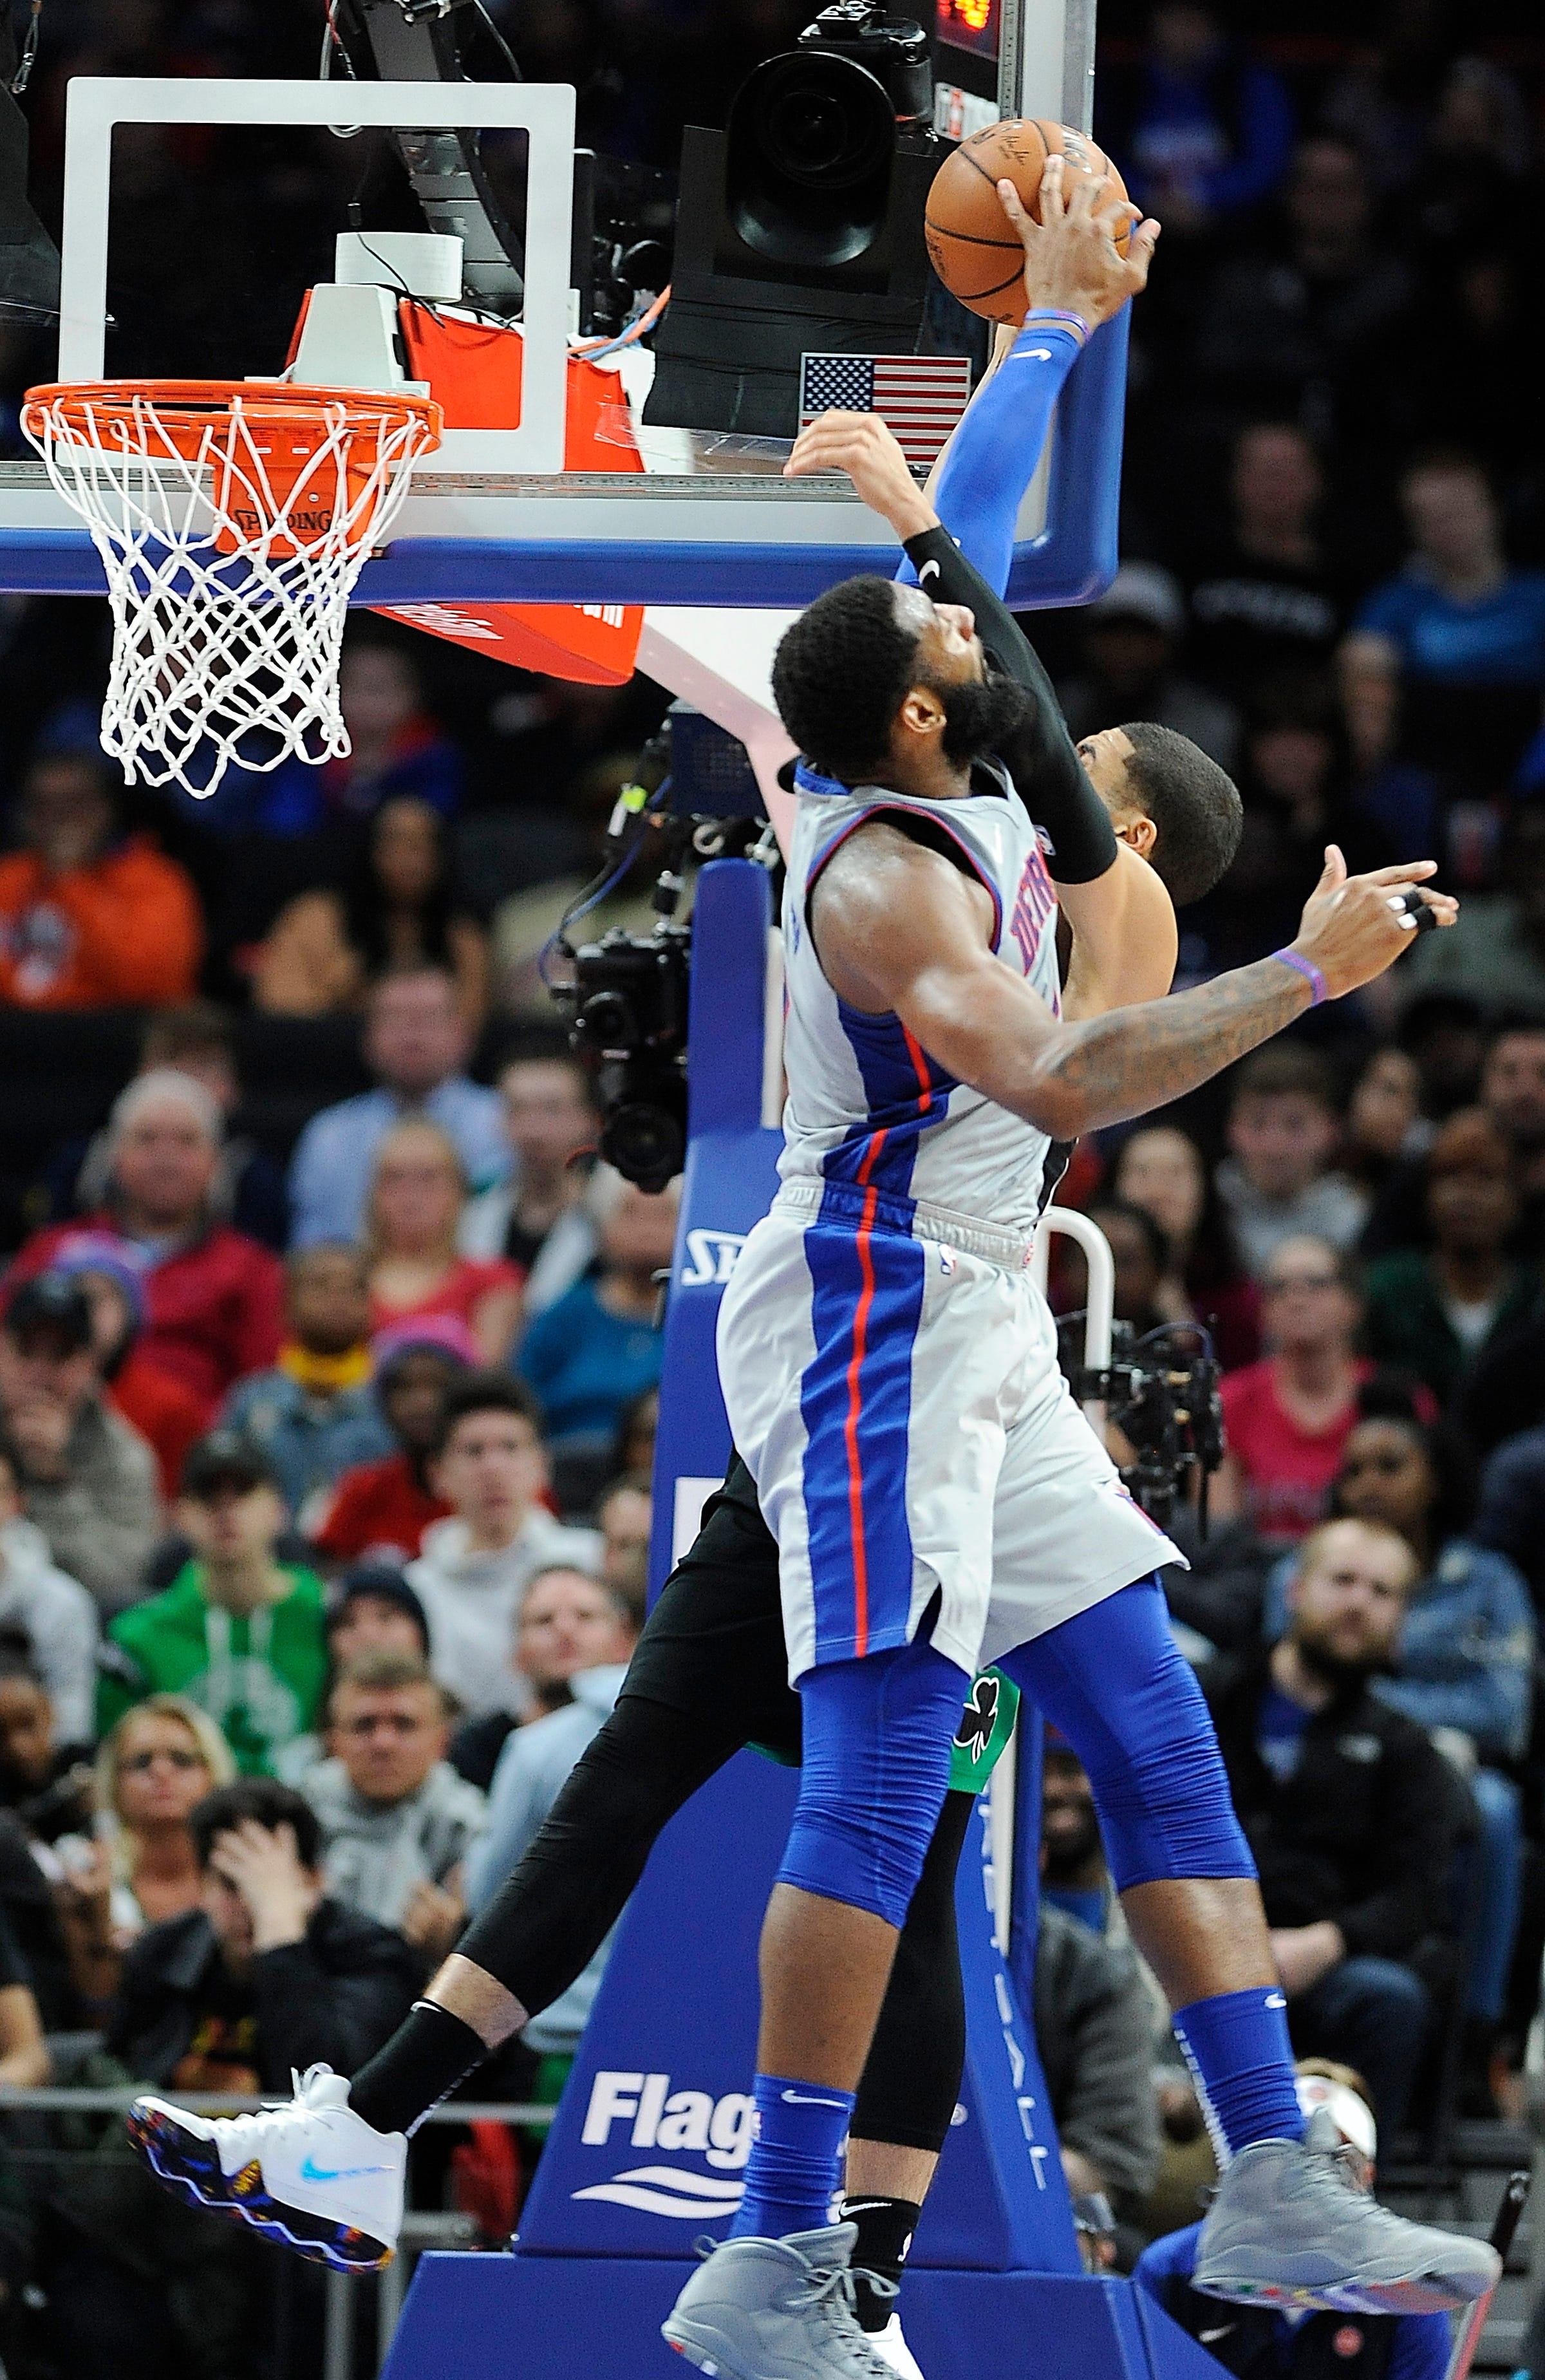 Pistons ' Andre Drummond blocks the dunk attempt by Celtics ' Jayson Tatum in the fourth quarter. Drummond had 19 points, 20 rebounds and five block shots